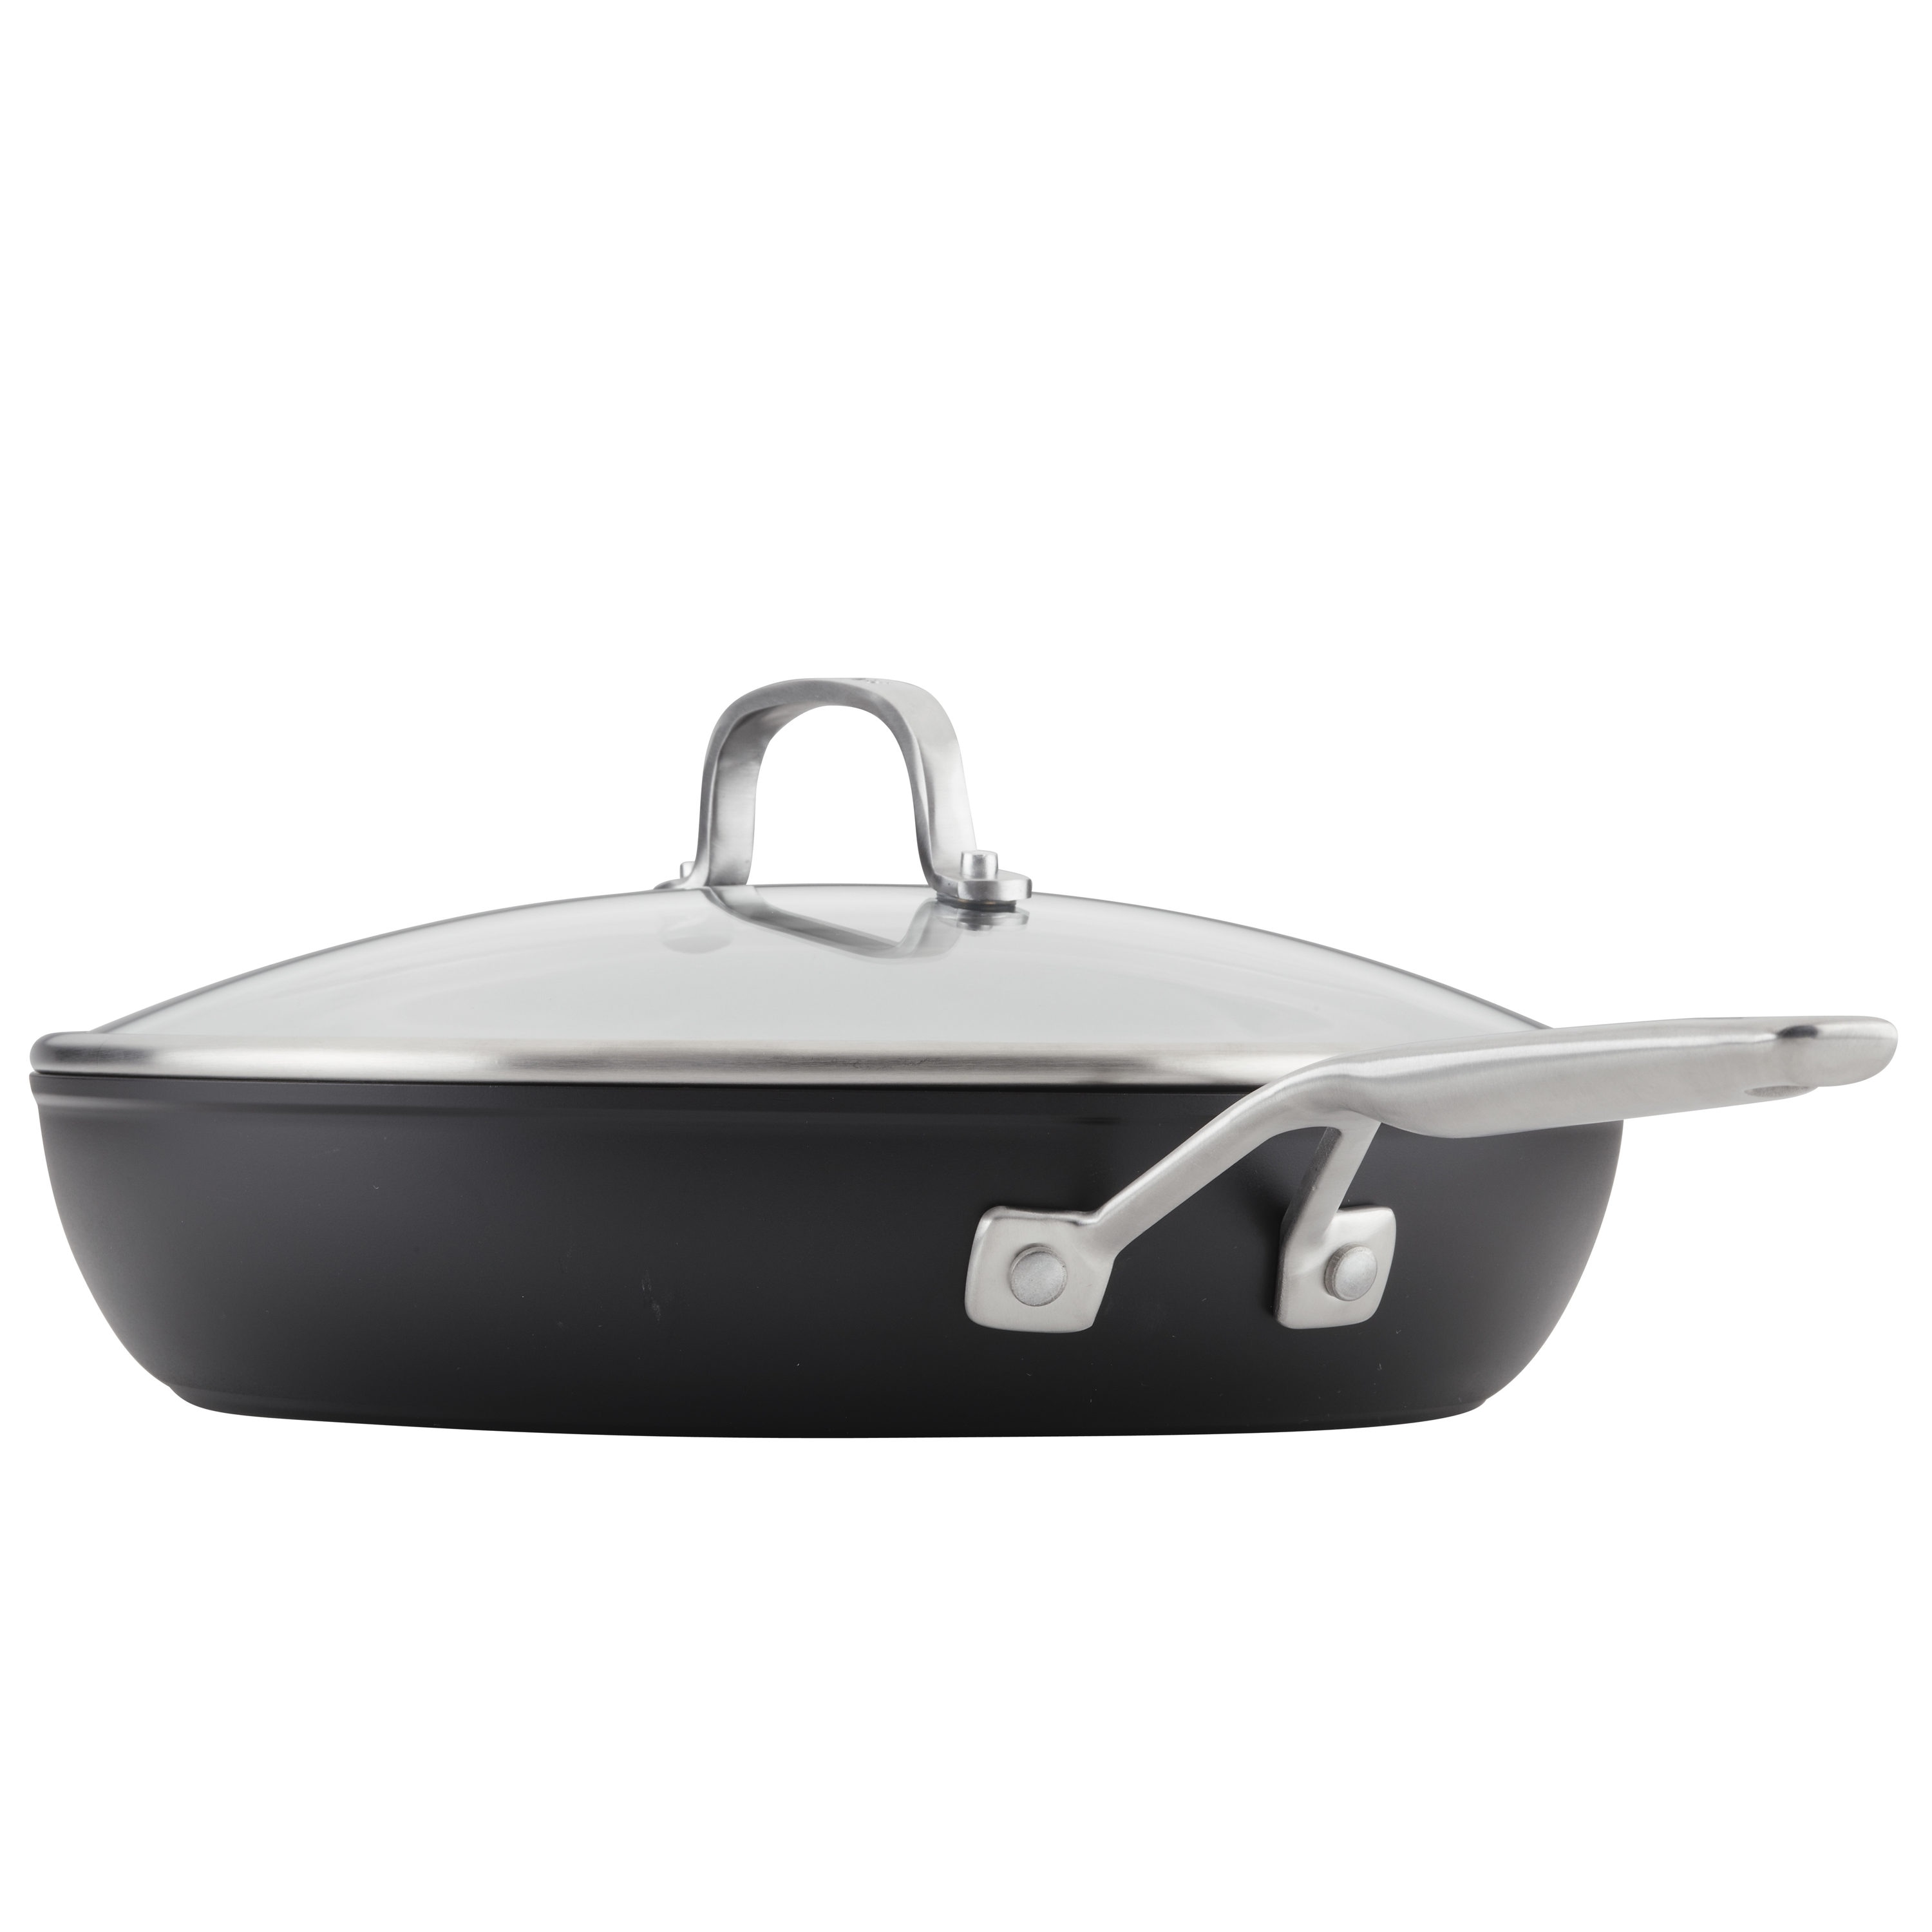 Kitchenaid Fry Pan, Covered, Nonstick, 12.25 Inch